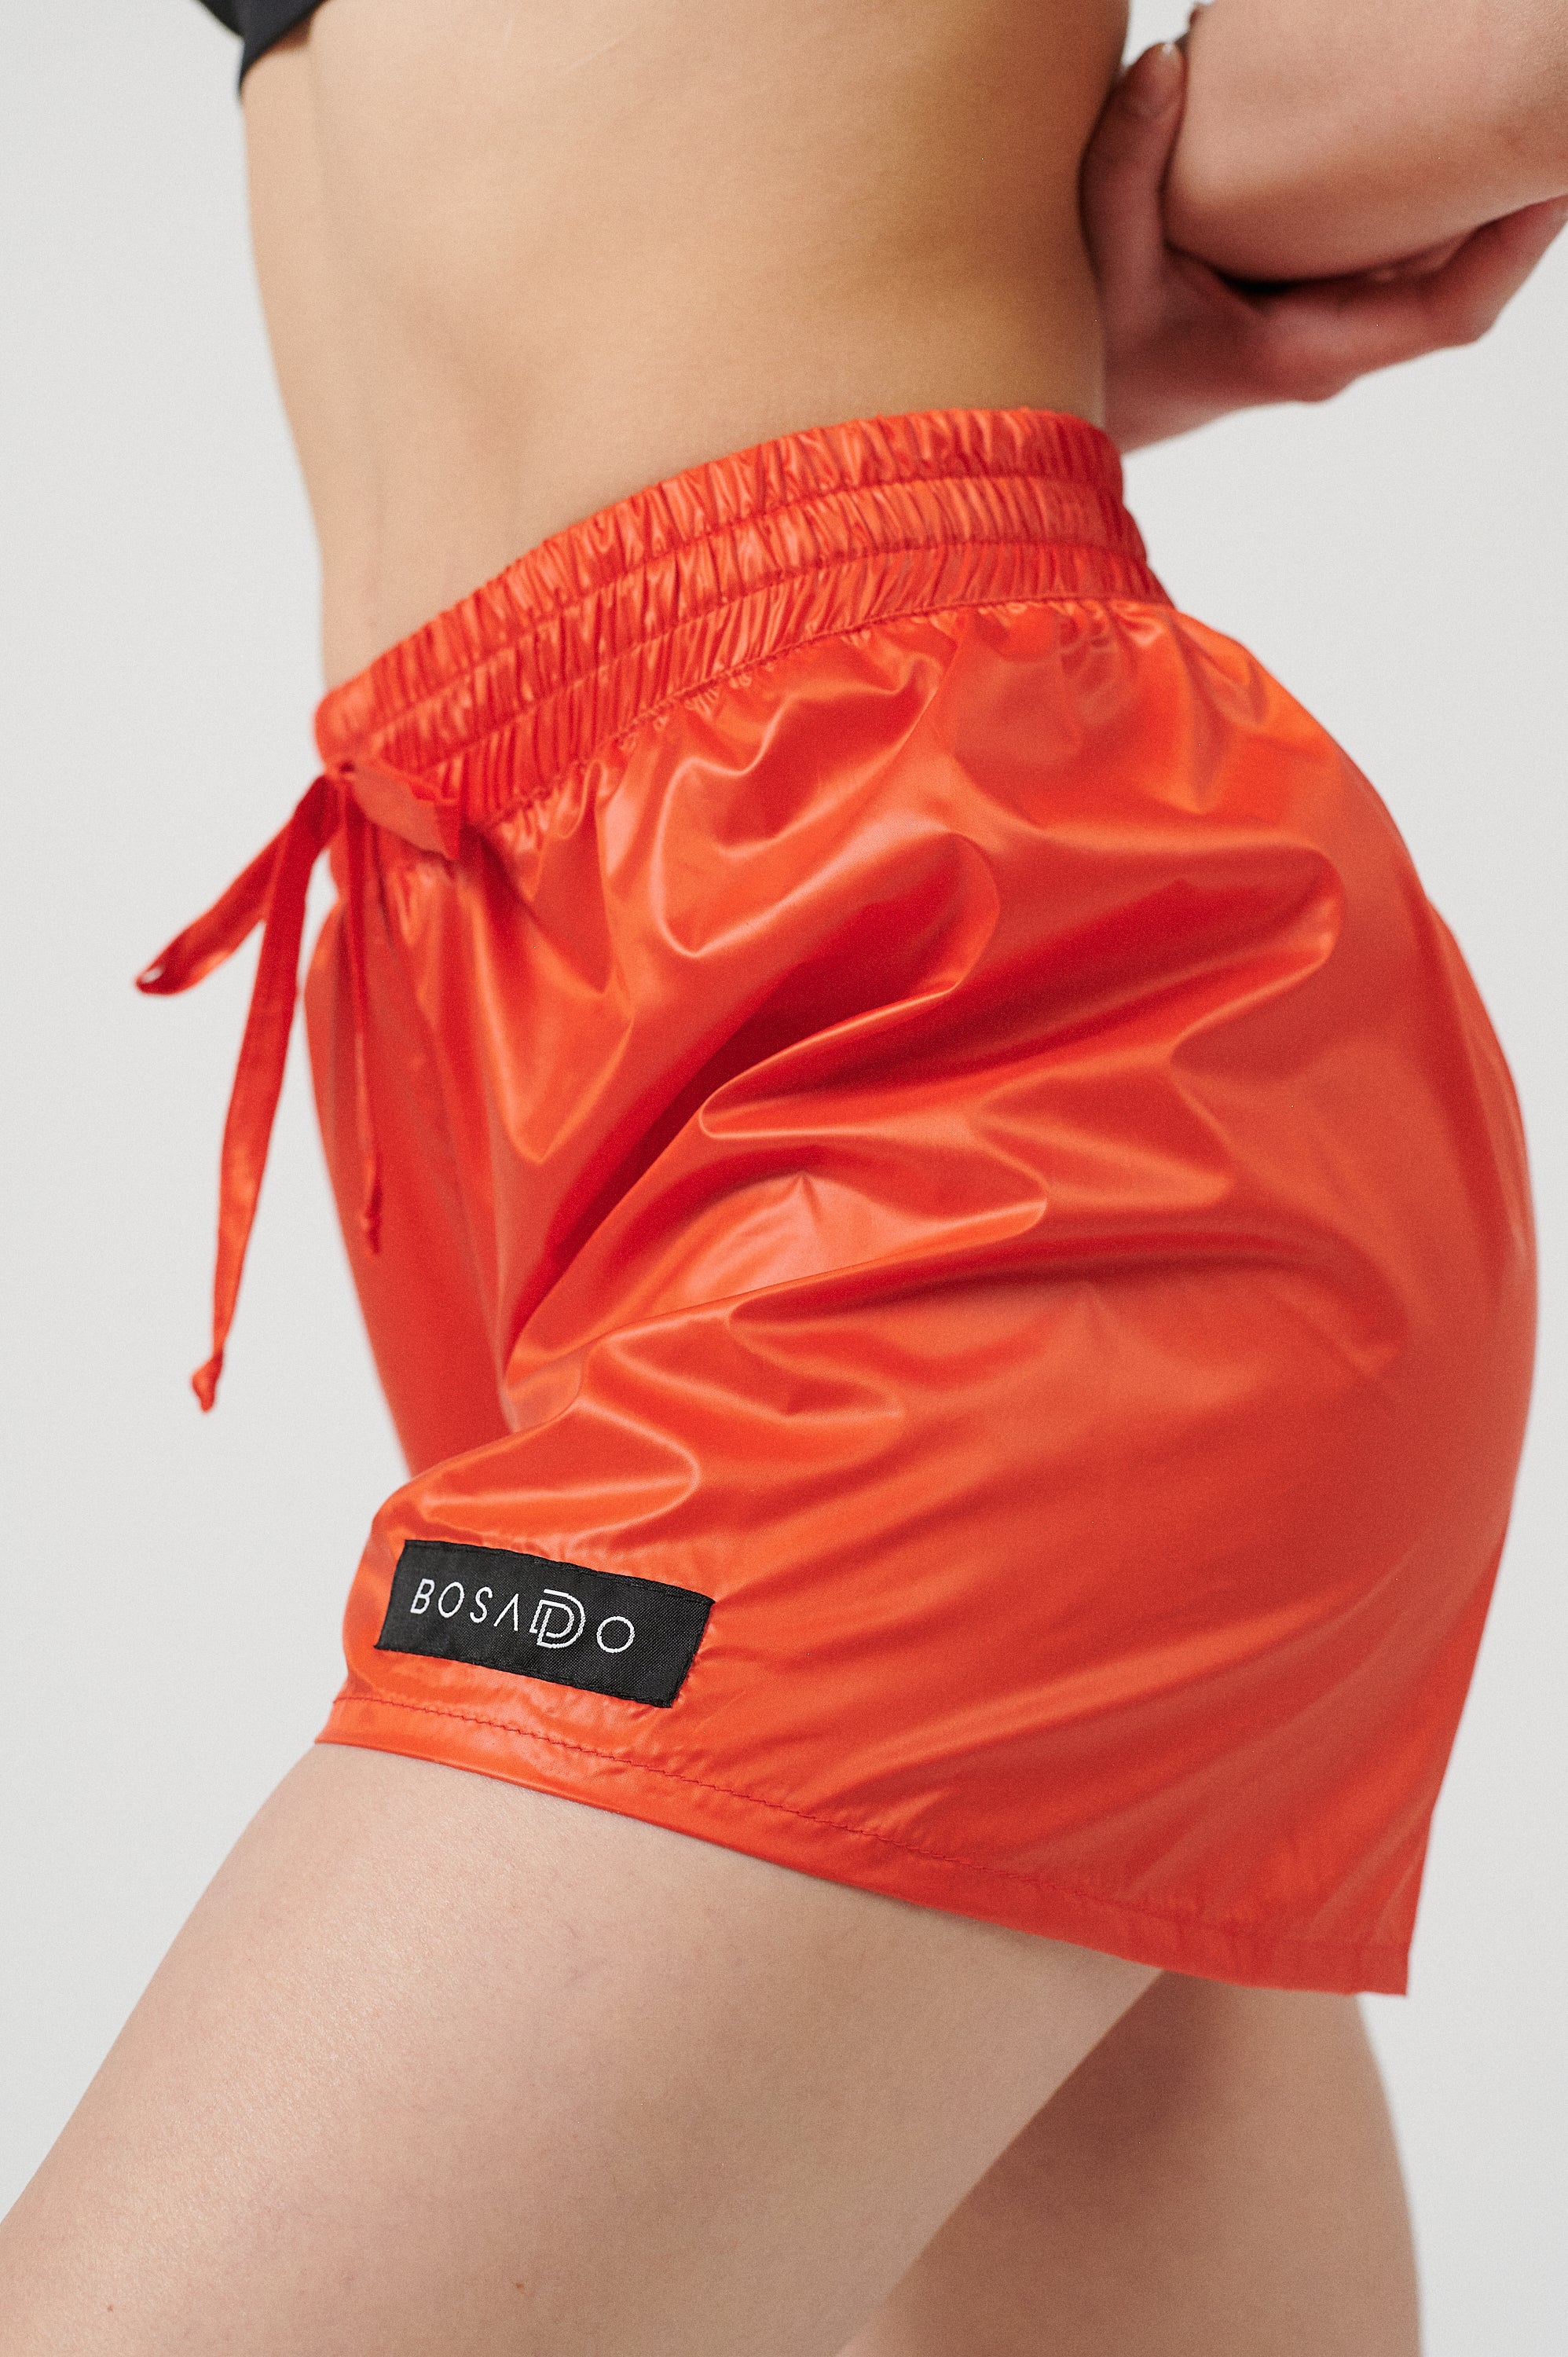 FUTURE GISELLE COLLECTION 24 | Futuristic red shorts